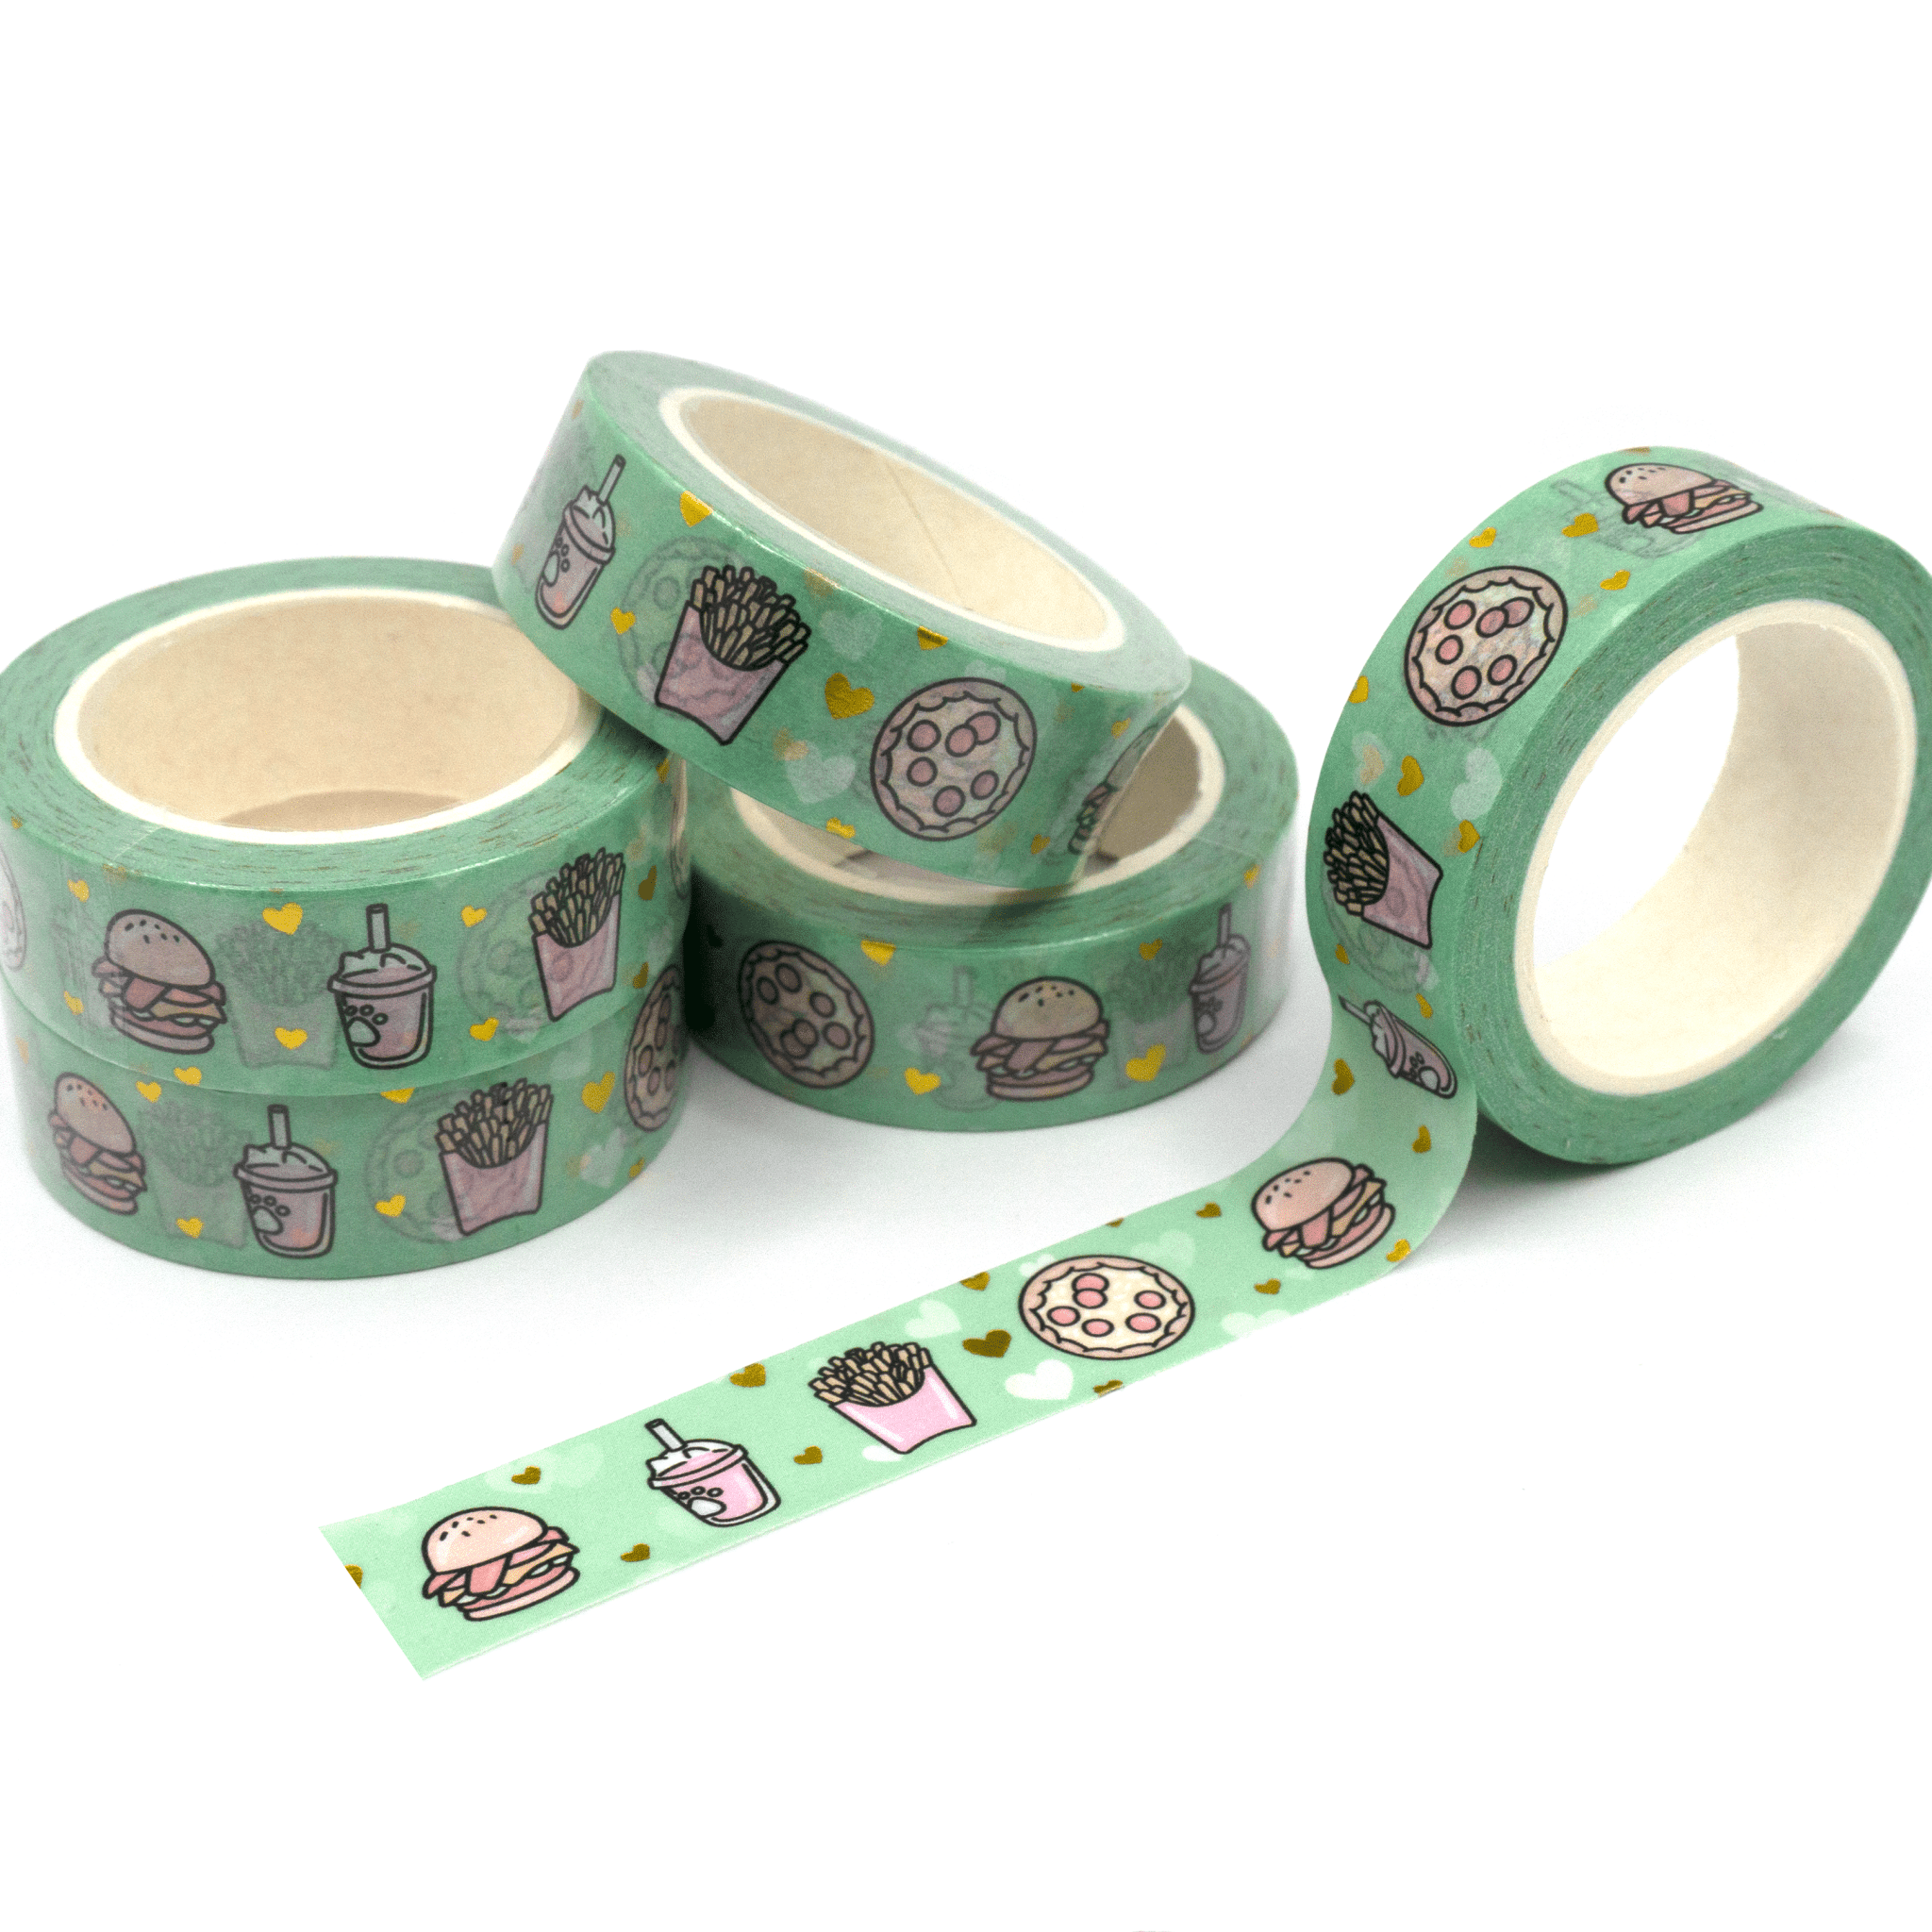 Food | Gold Foiled Doodle Washi Tape by Plannerface